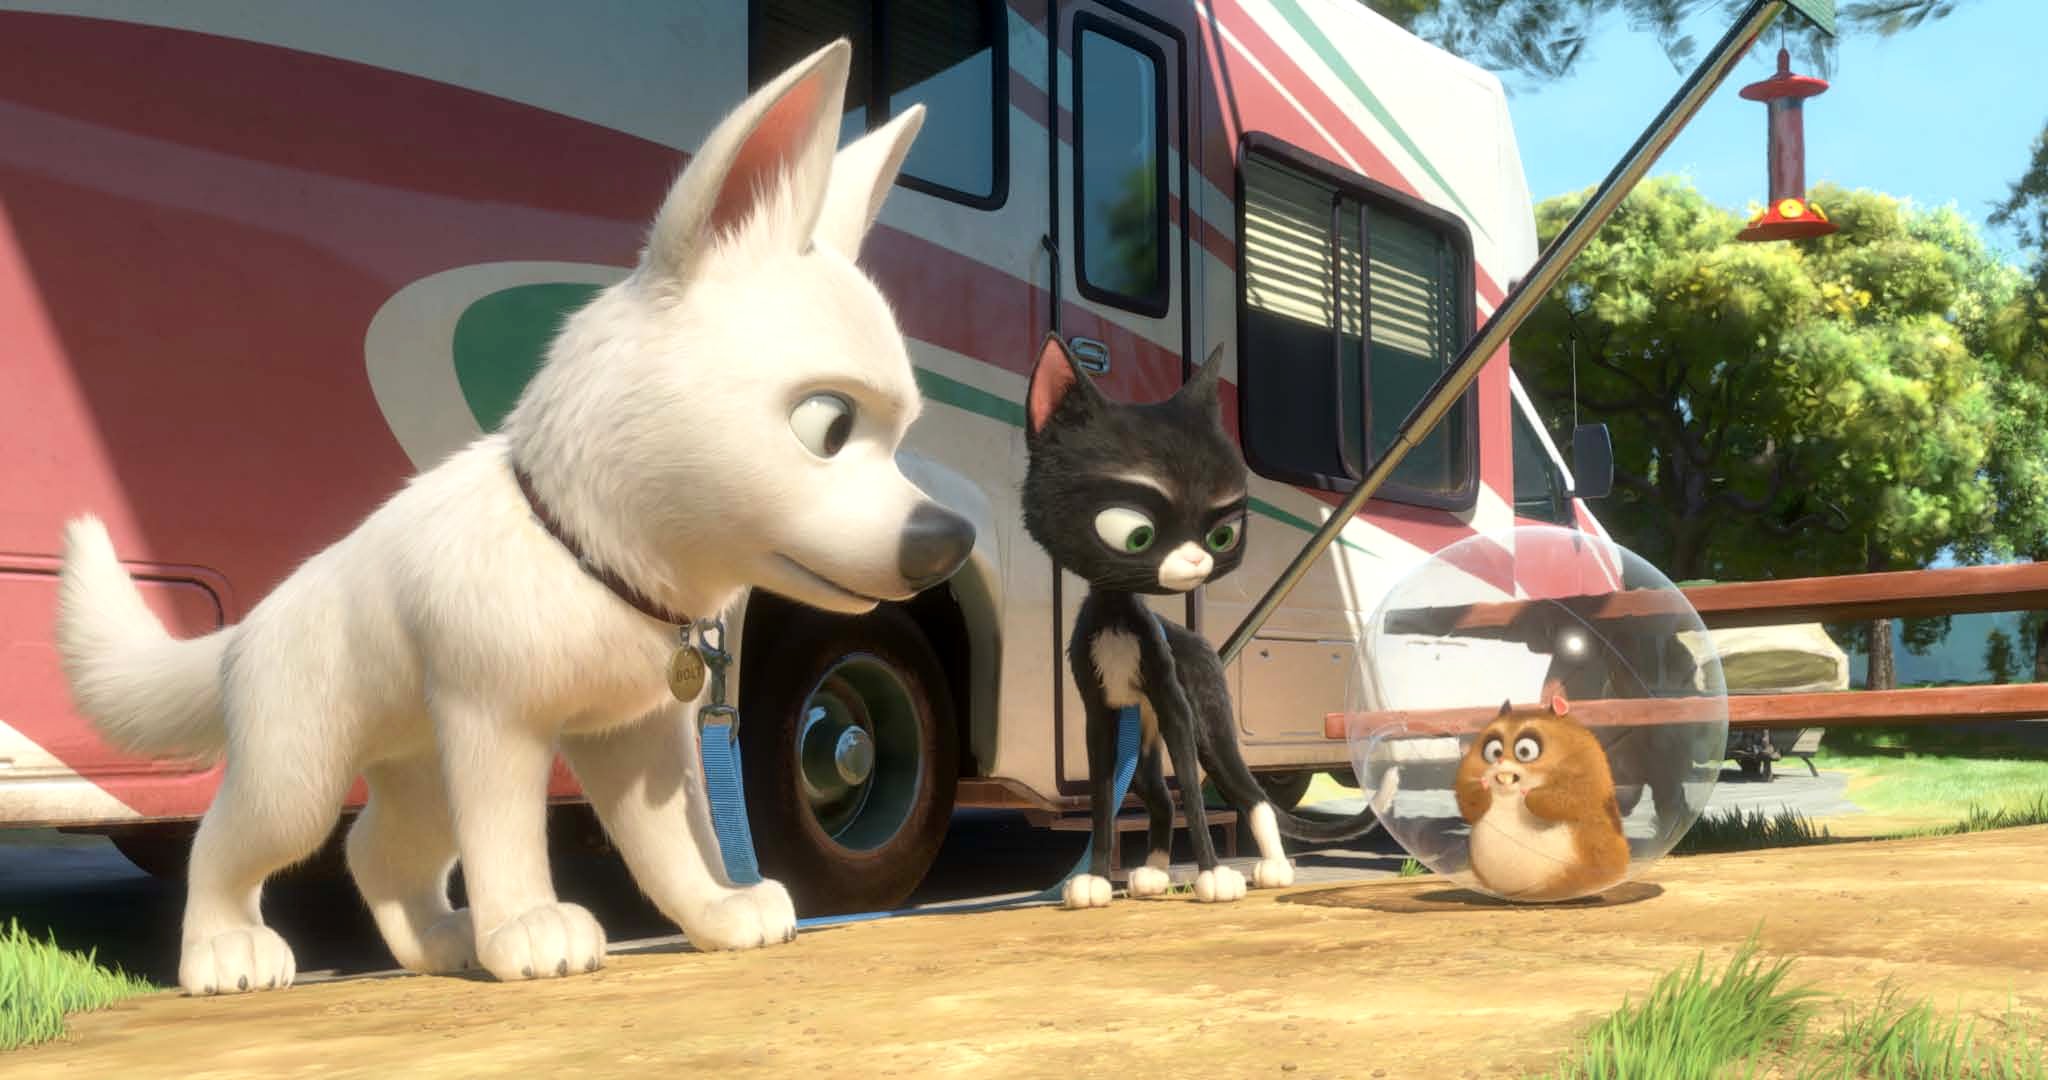 A scene from Walt Disney Pictures' Bolt (2008)